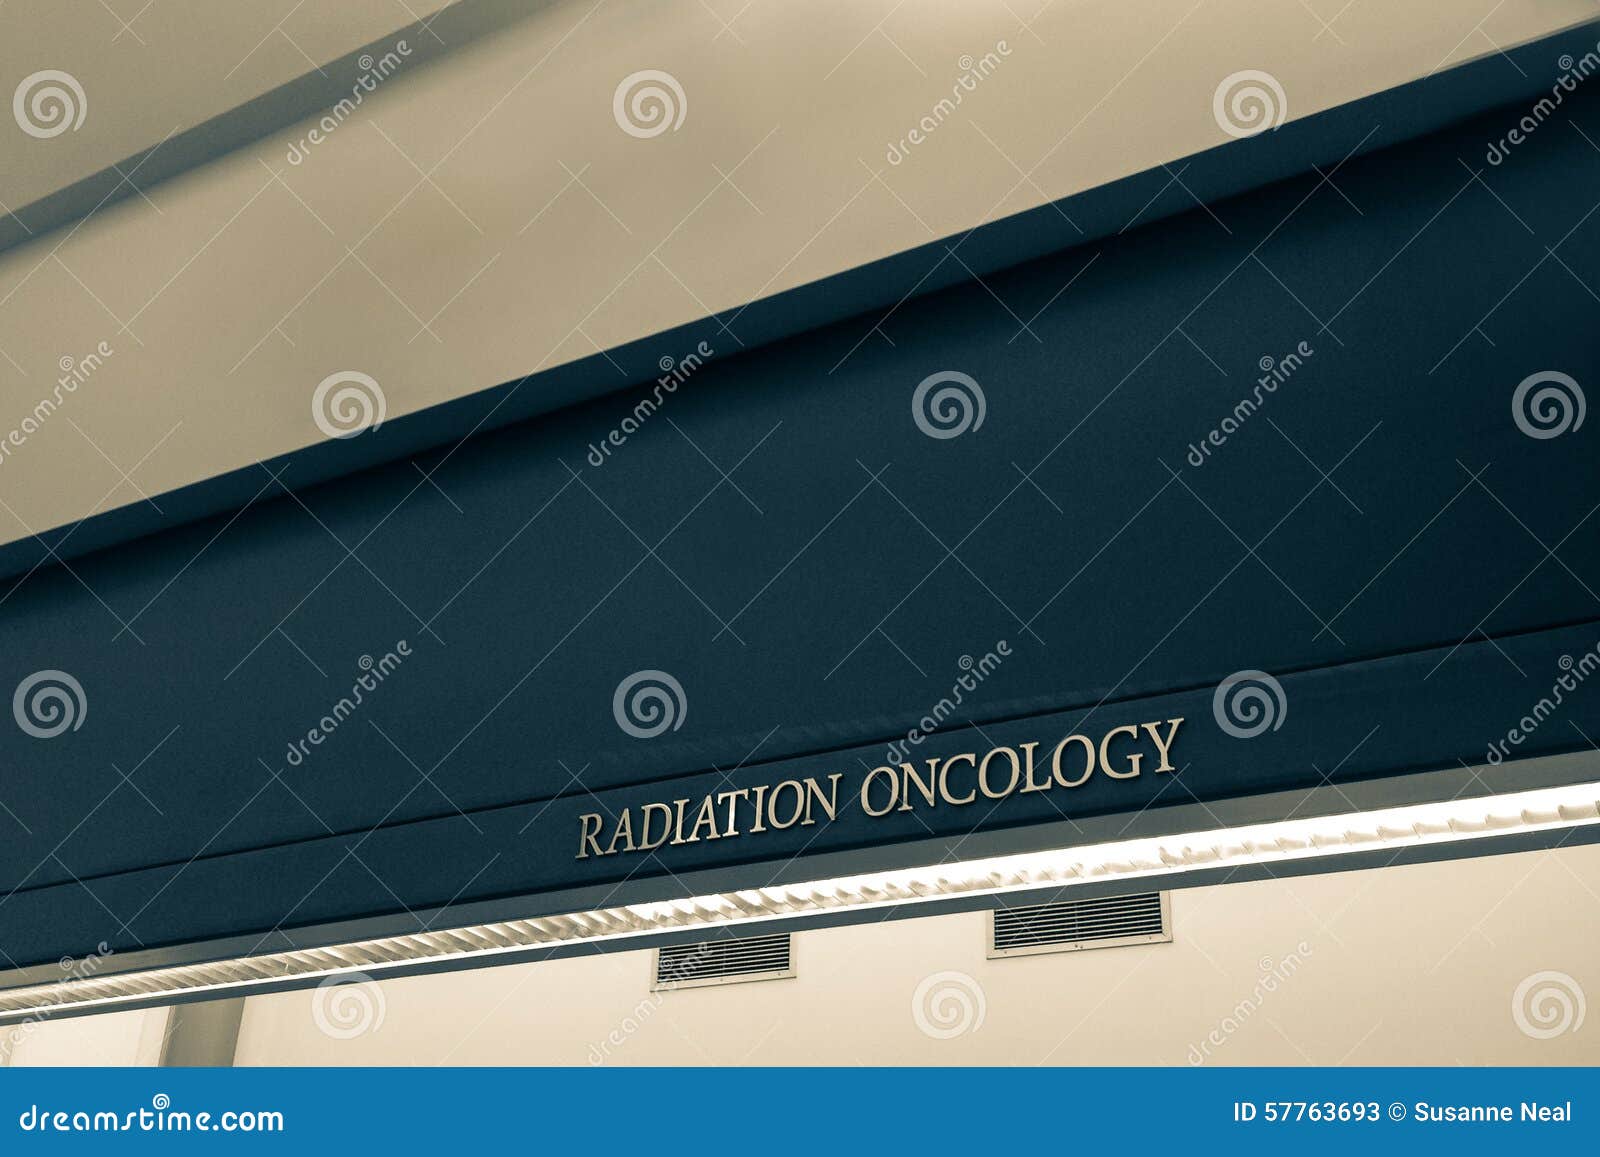 Radiation oncology center business plan